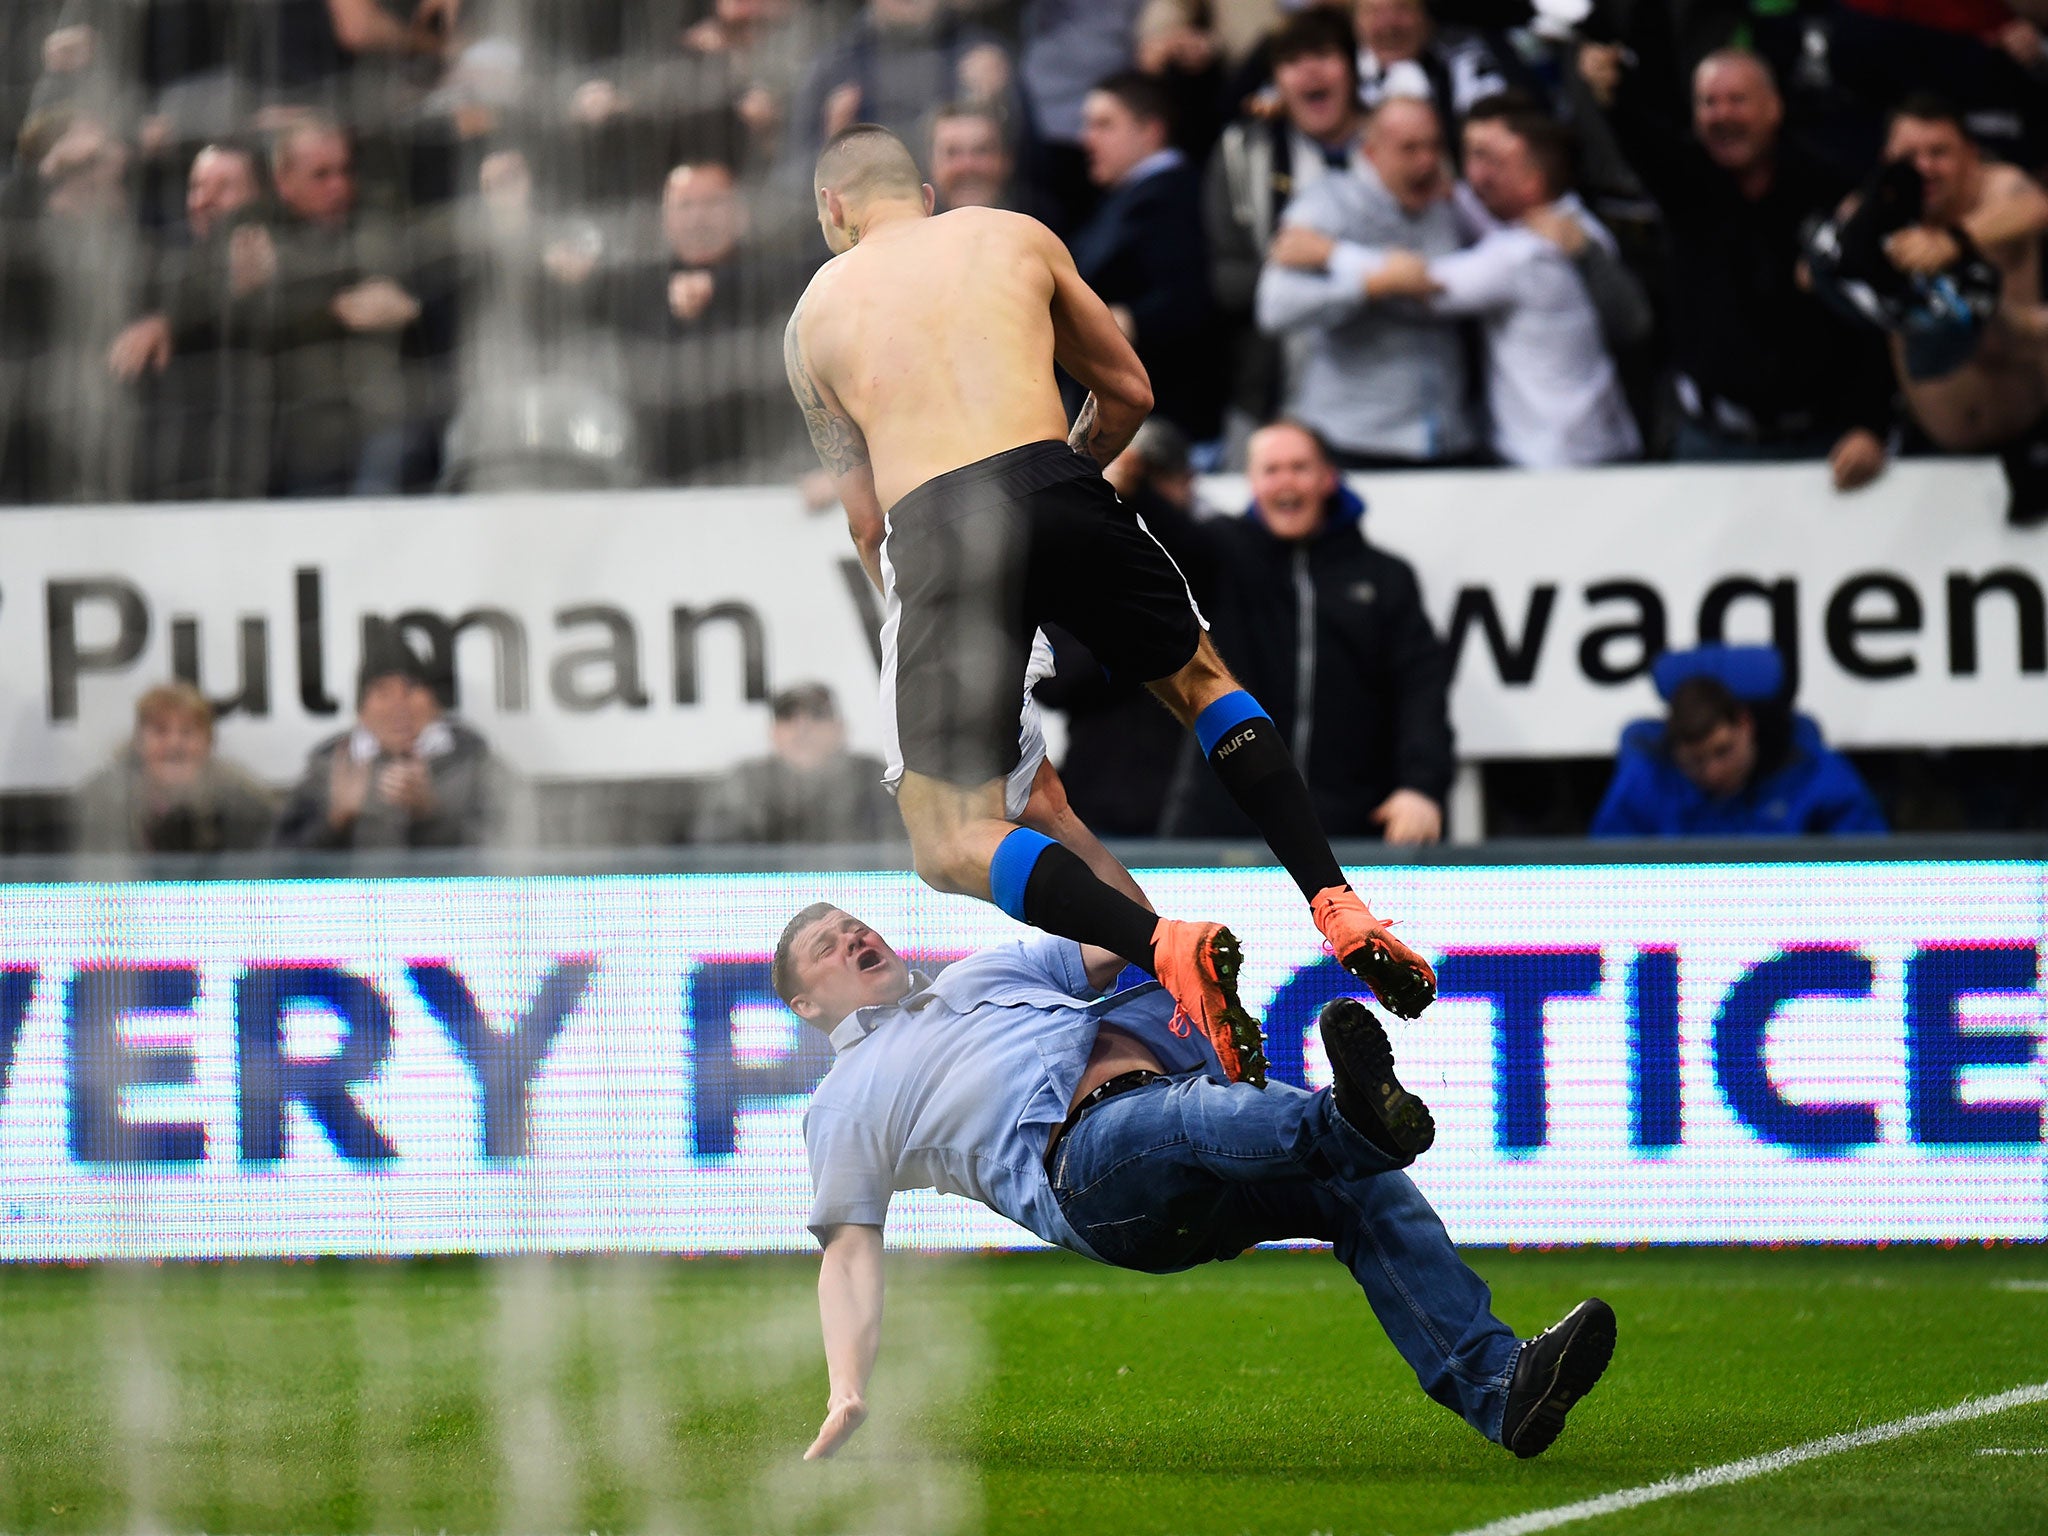 Aleksandar Mitrovic leaps into a Newcastle supporter who entered the field of play